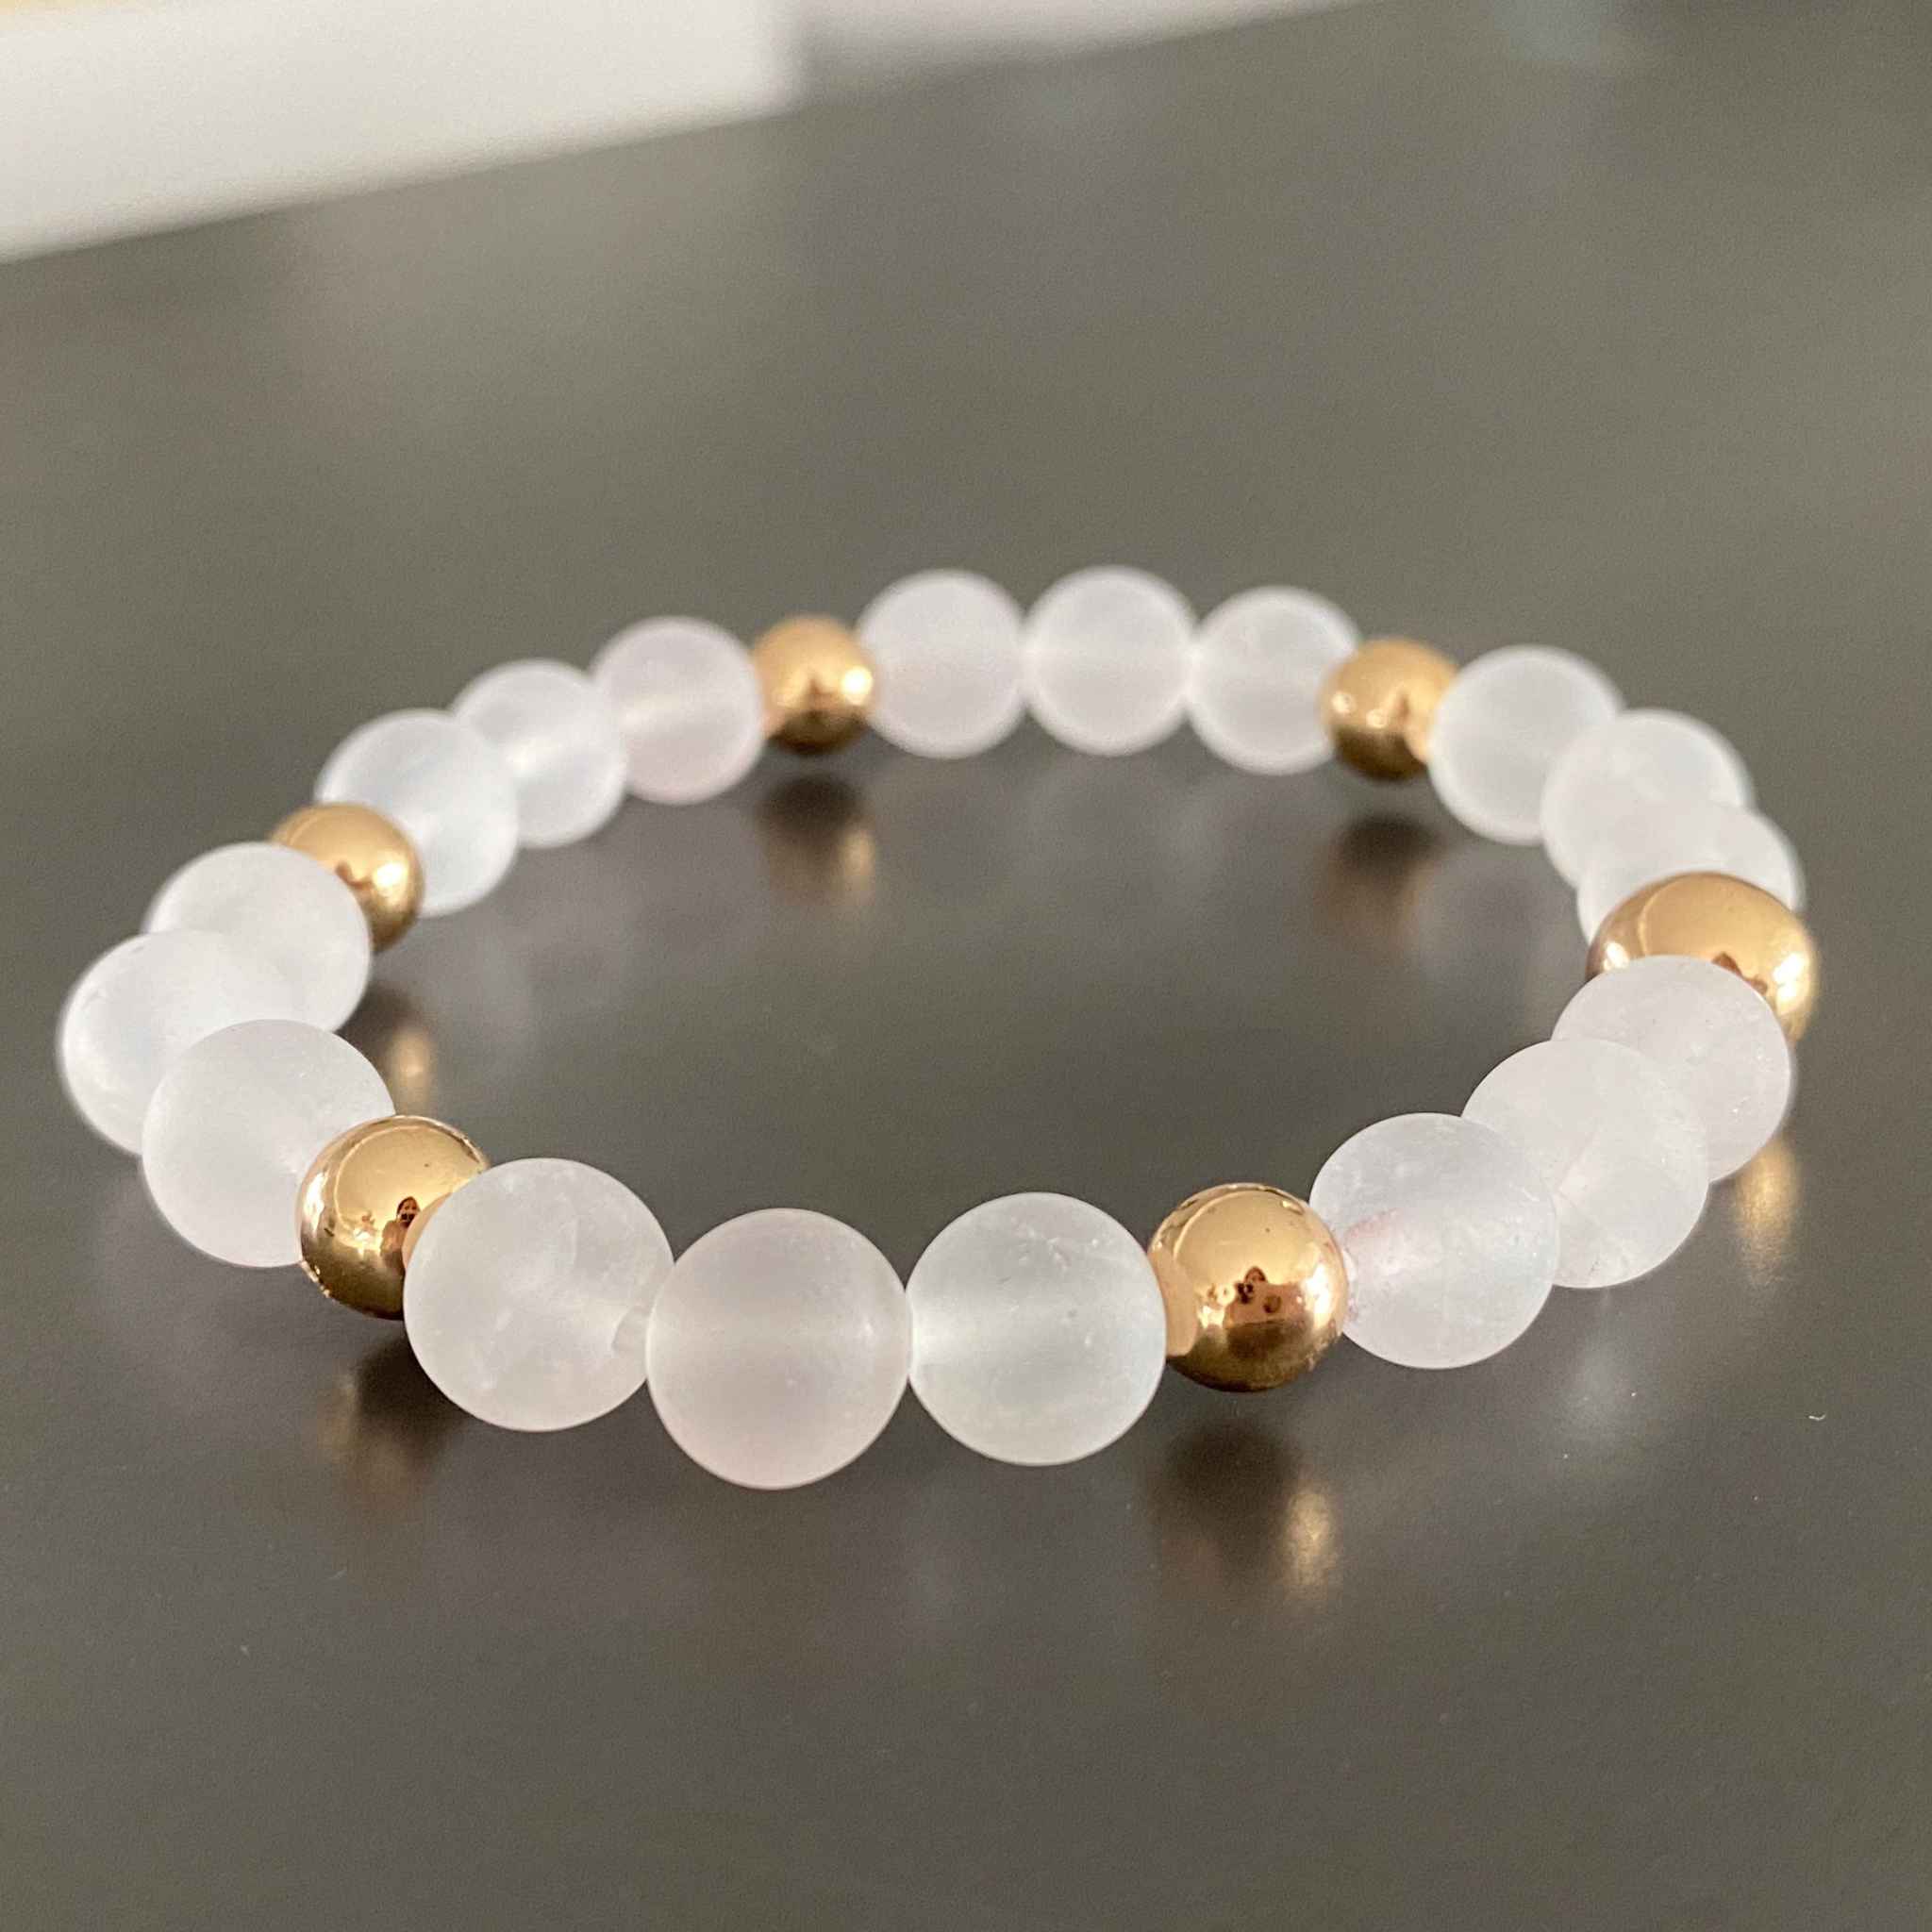 Beautifully displayed Rose Quartz Bracelet for women, symbolizing love and peace, by Alessandra James.